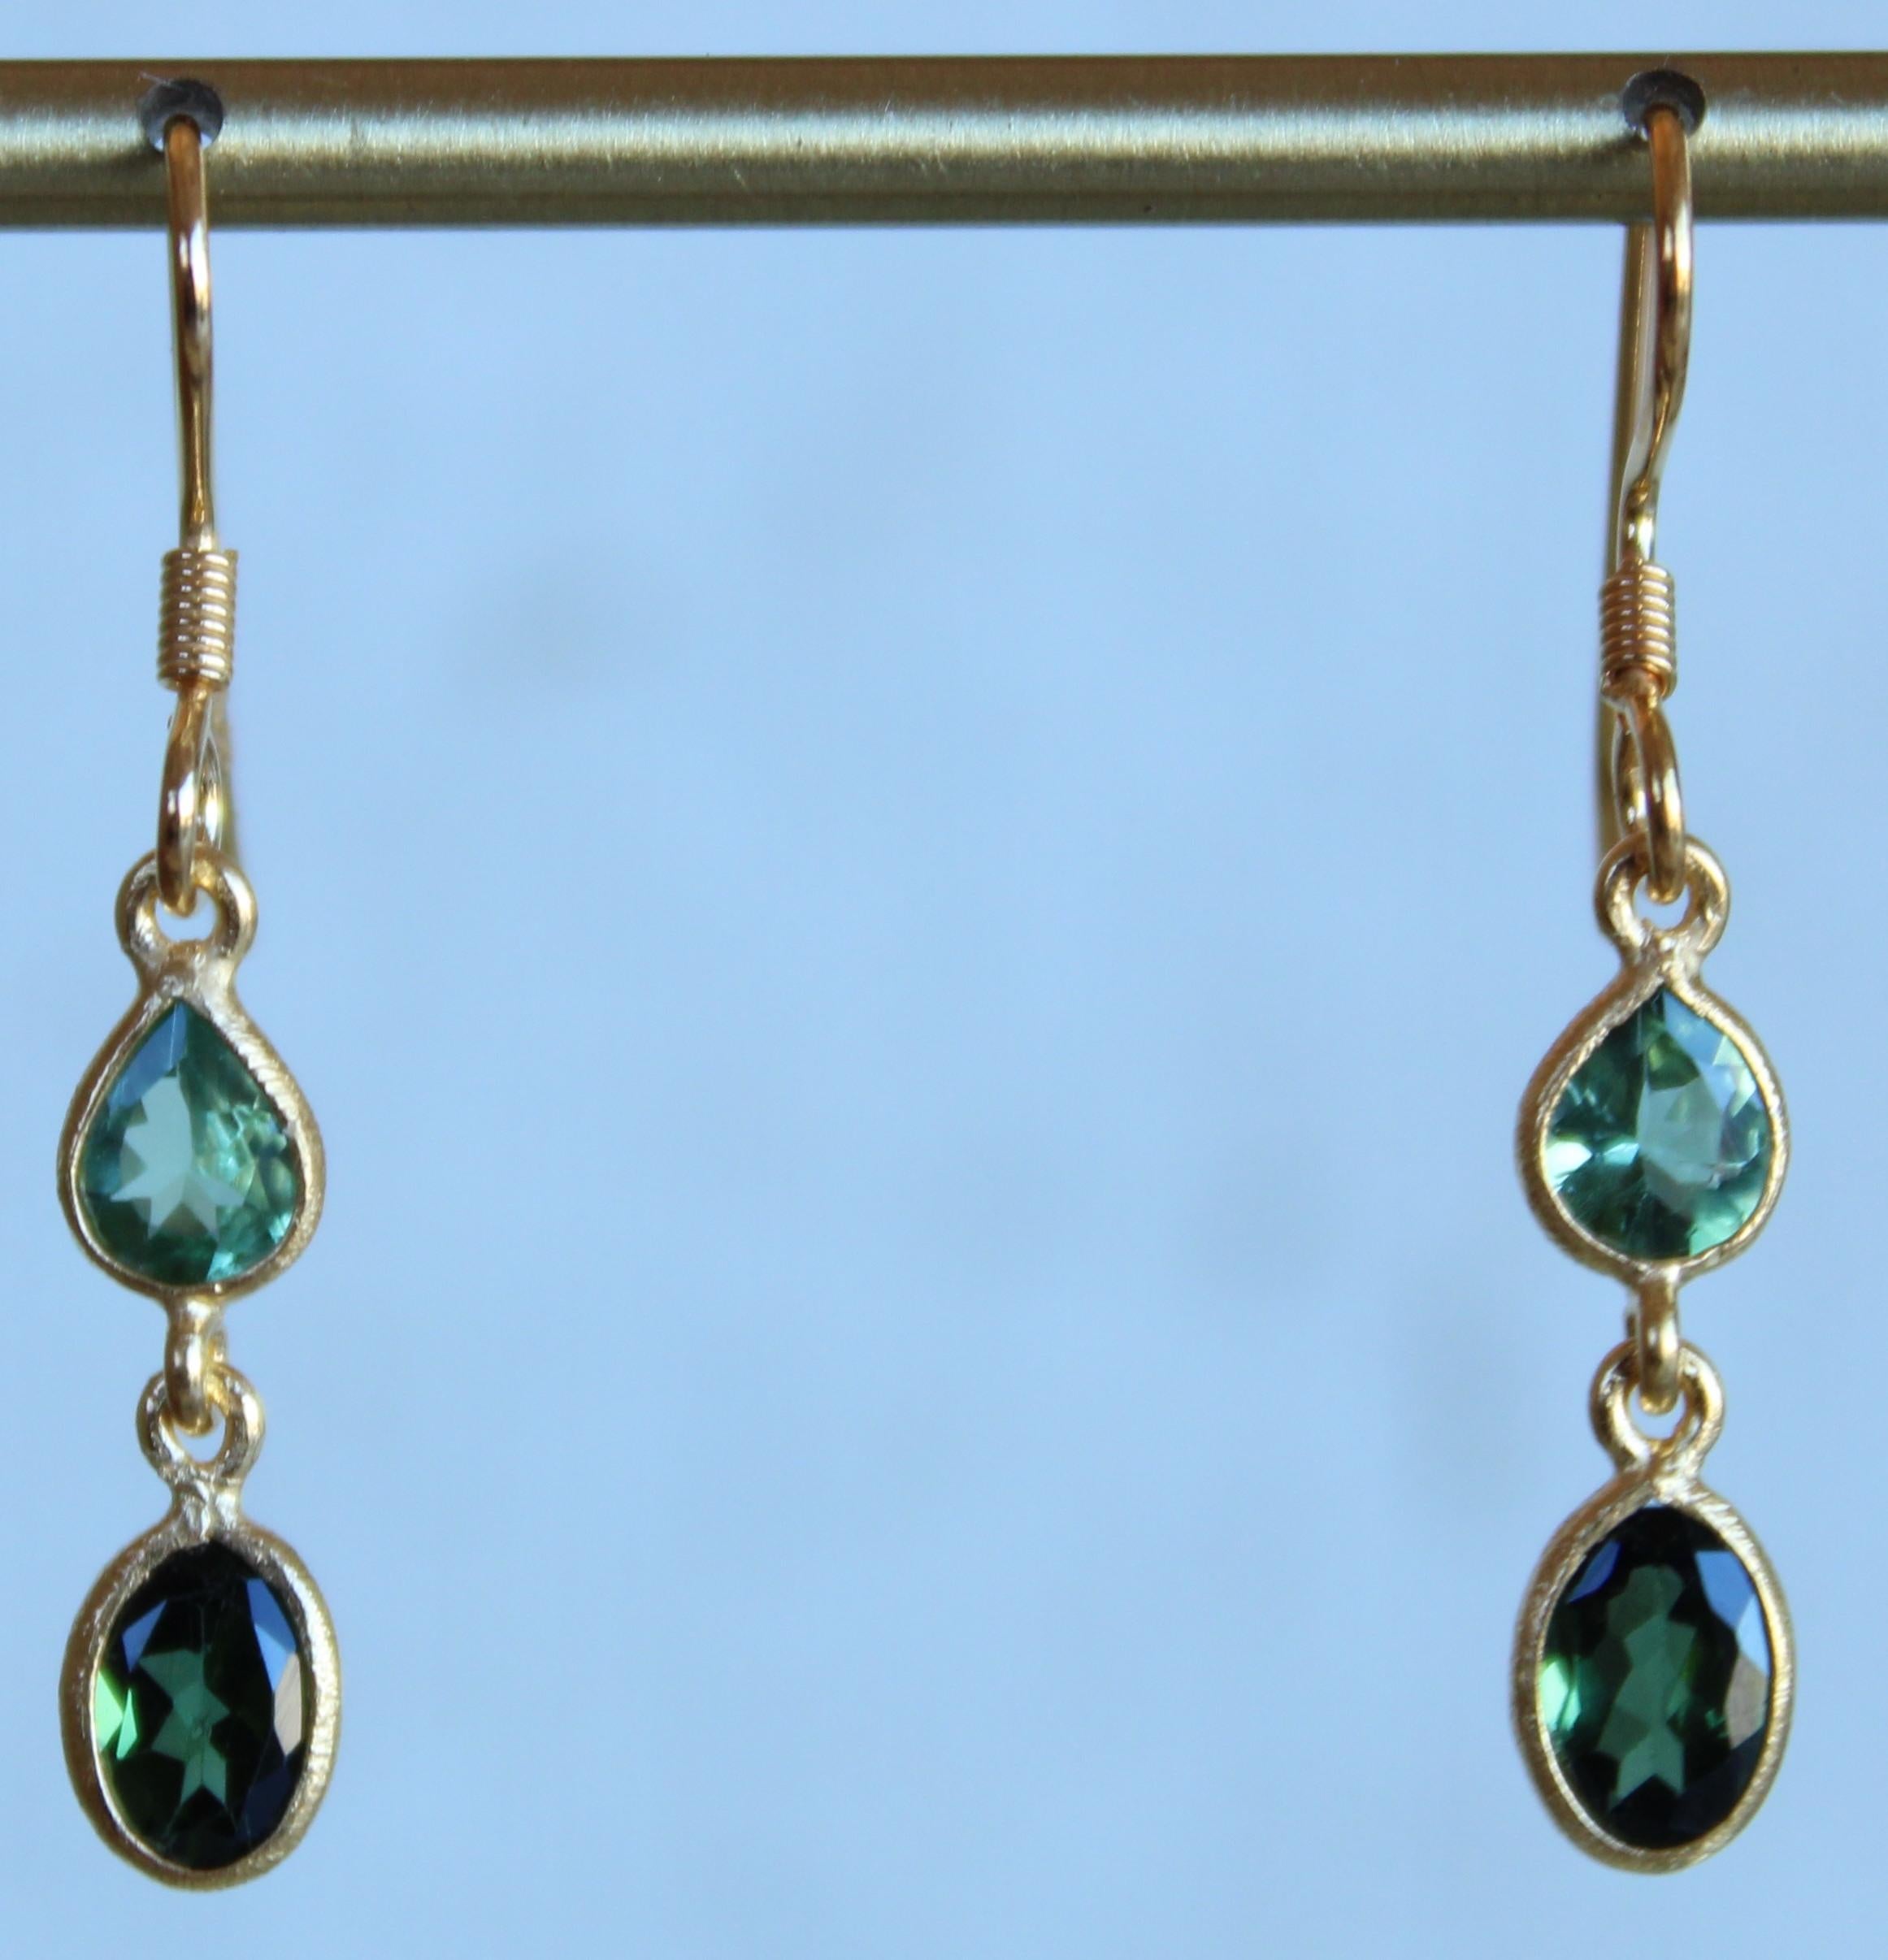 This pair of earrings are absolutely exquisite with showcasing the variations of green Tourmaline. The top stone is a seafood green Tourmaline pear while the bottom stone is a hunter green Tourmaline oval. These stones are set in a 14K gold plating